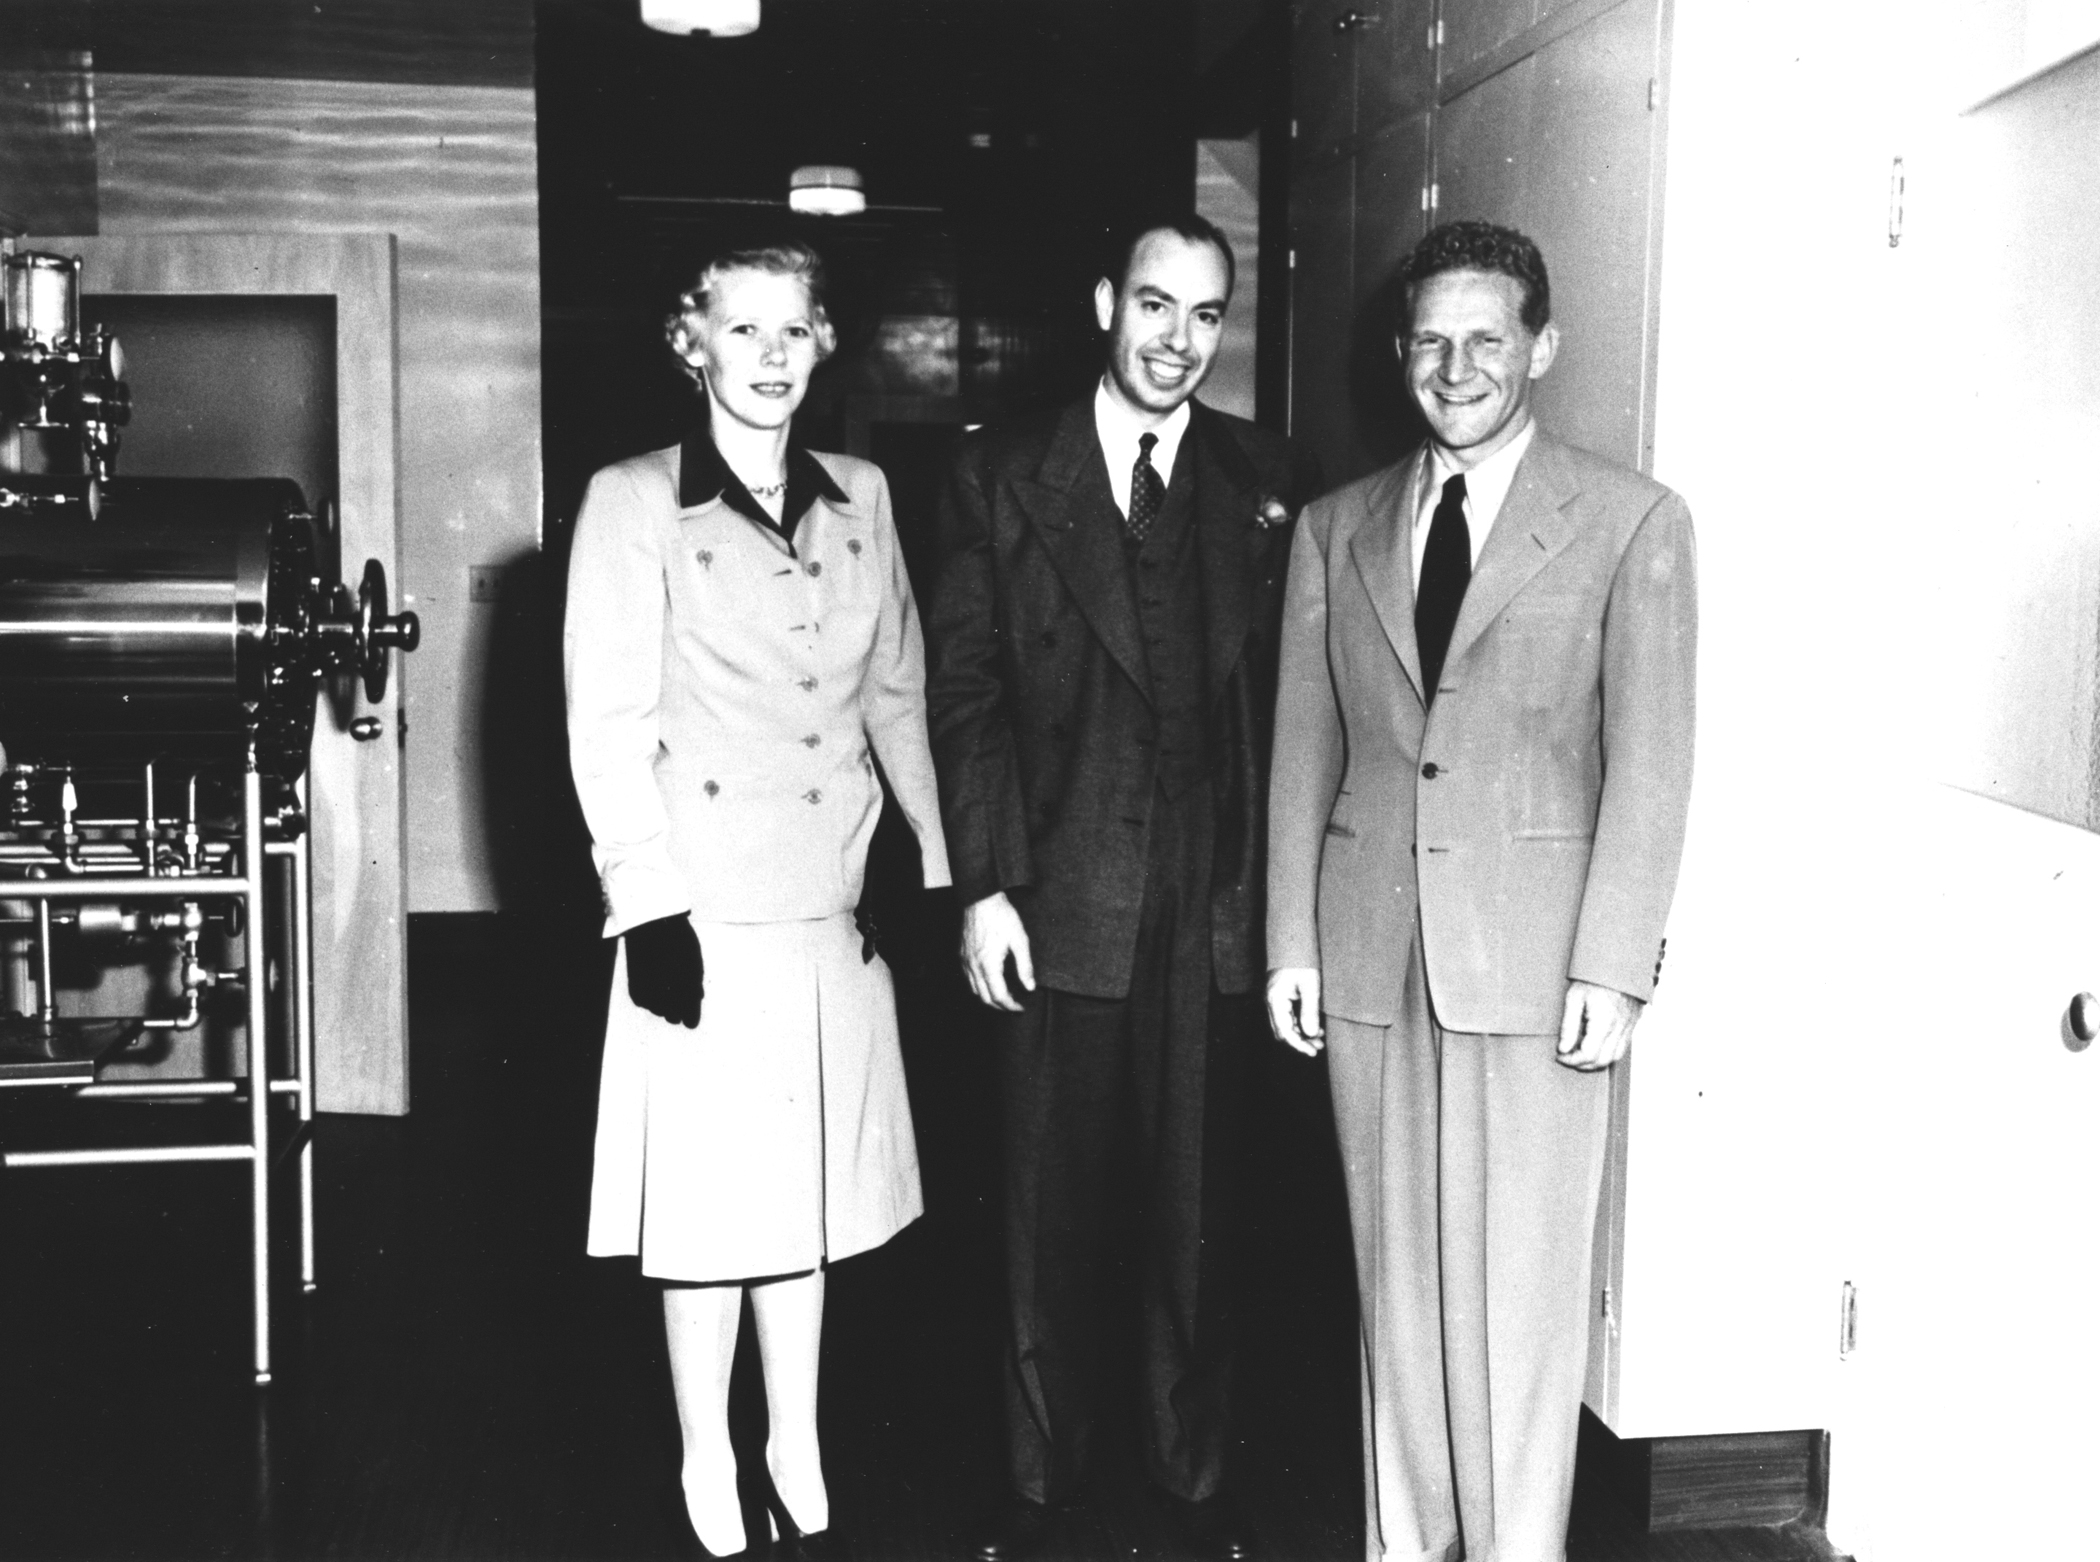 Millie and Cecil Cutting with Kaiser Permanente physician co-founder Sidney Garfield in 1943.